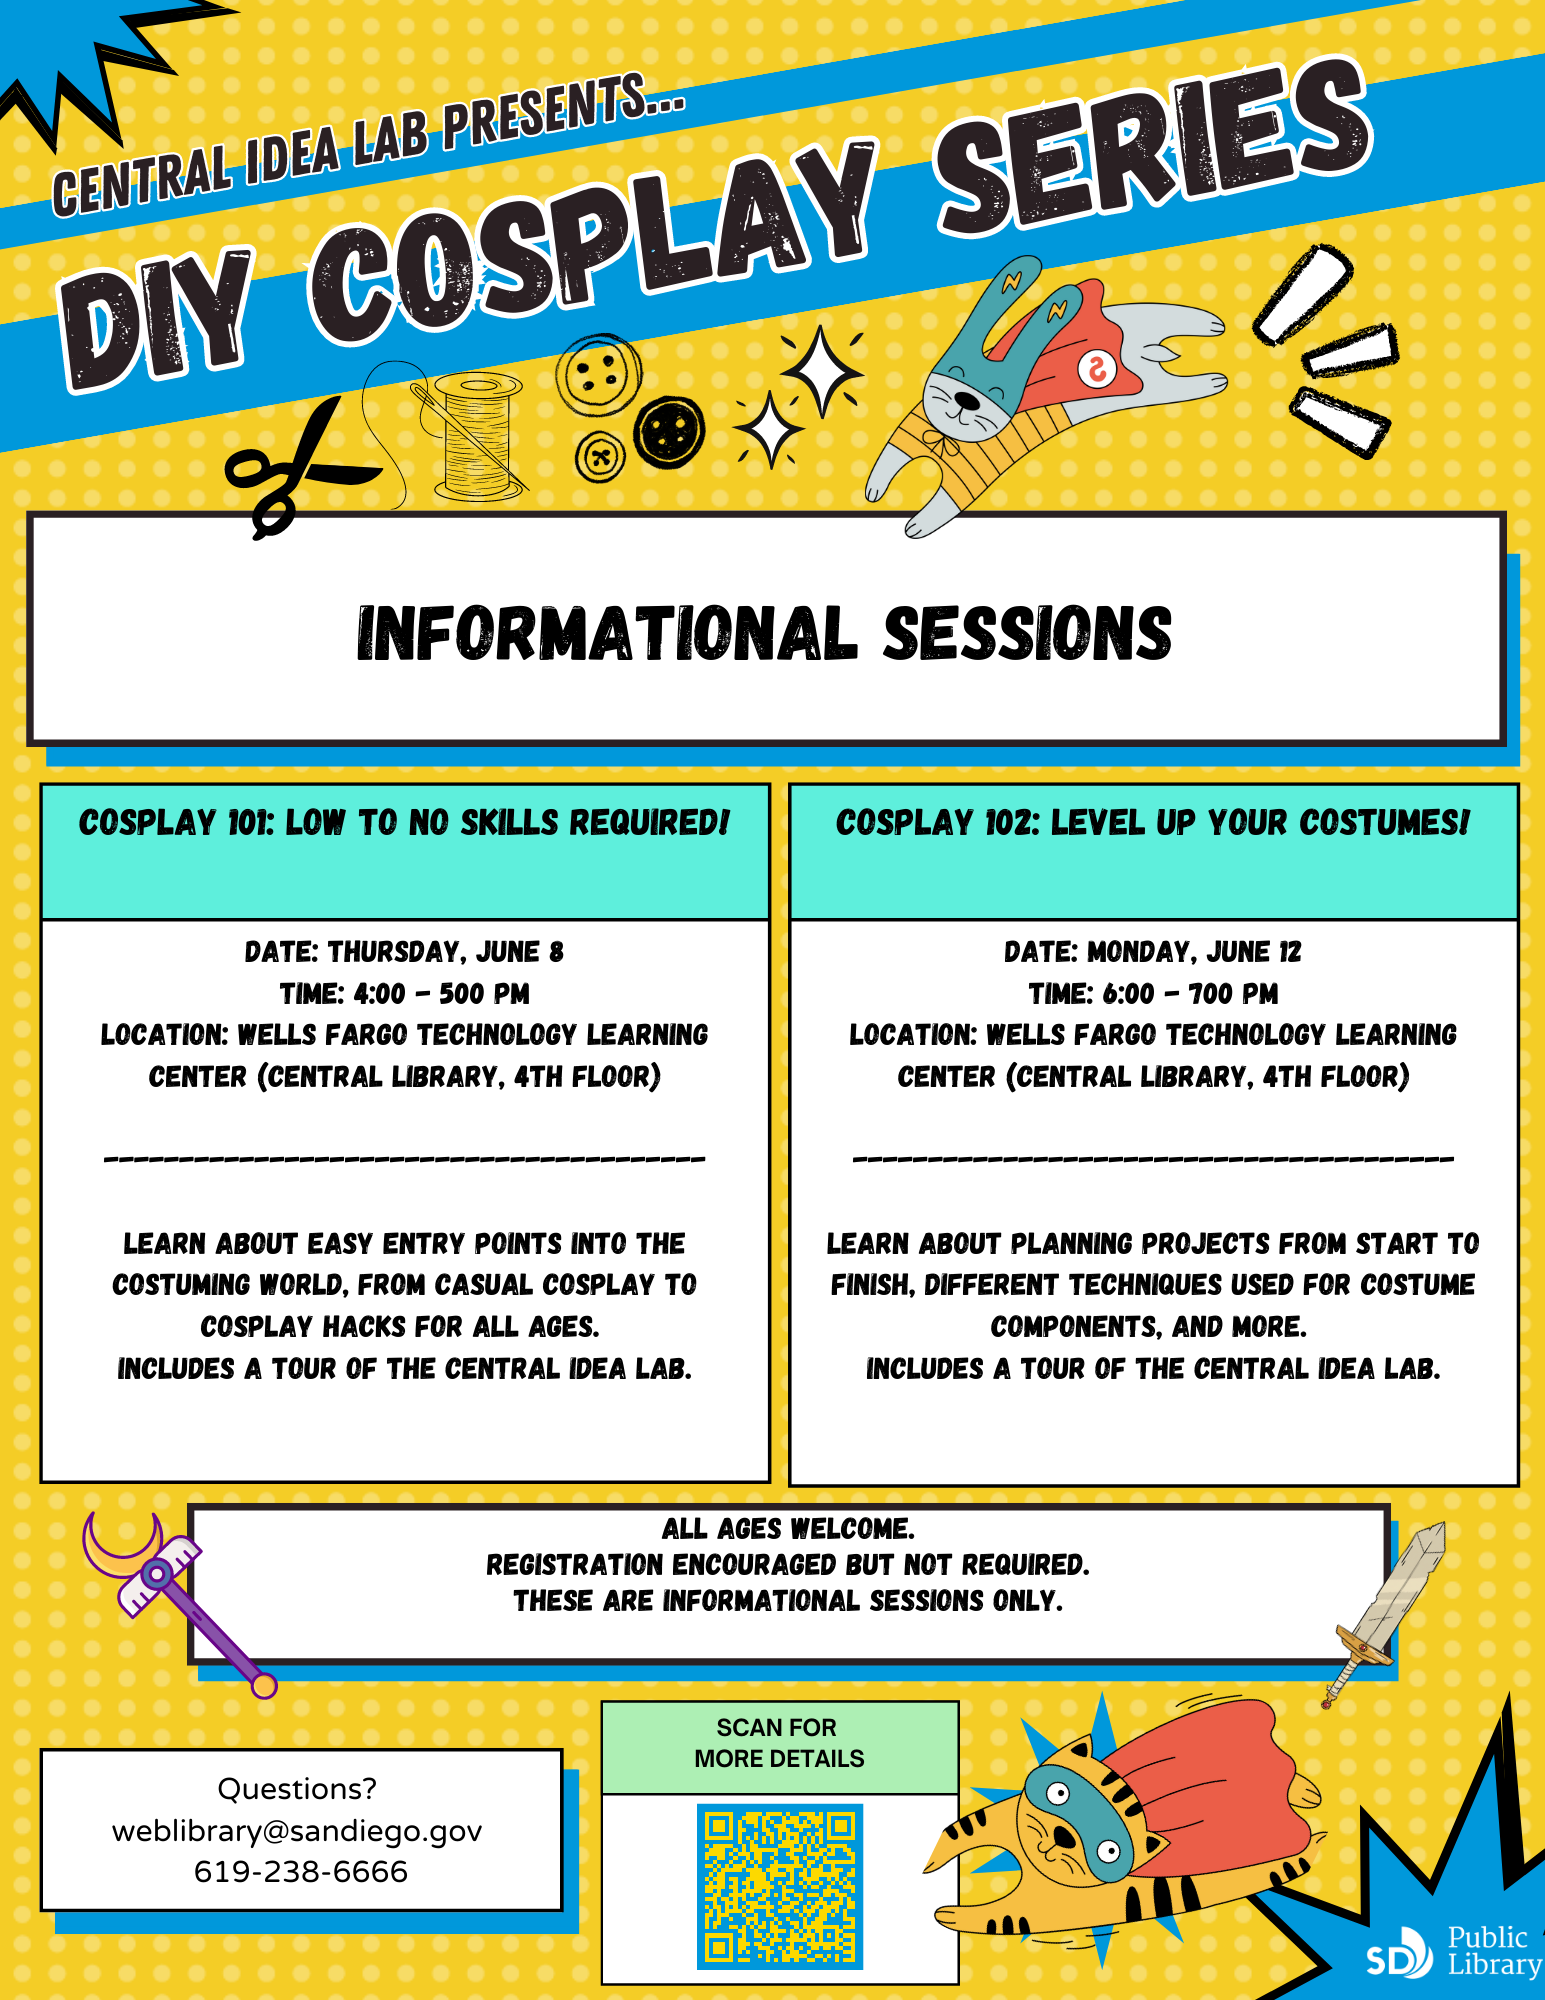 DIY Cosplay Series: Info sessions